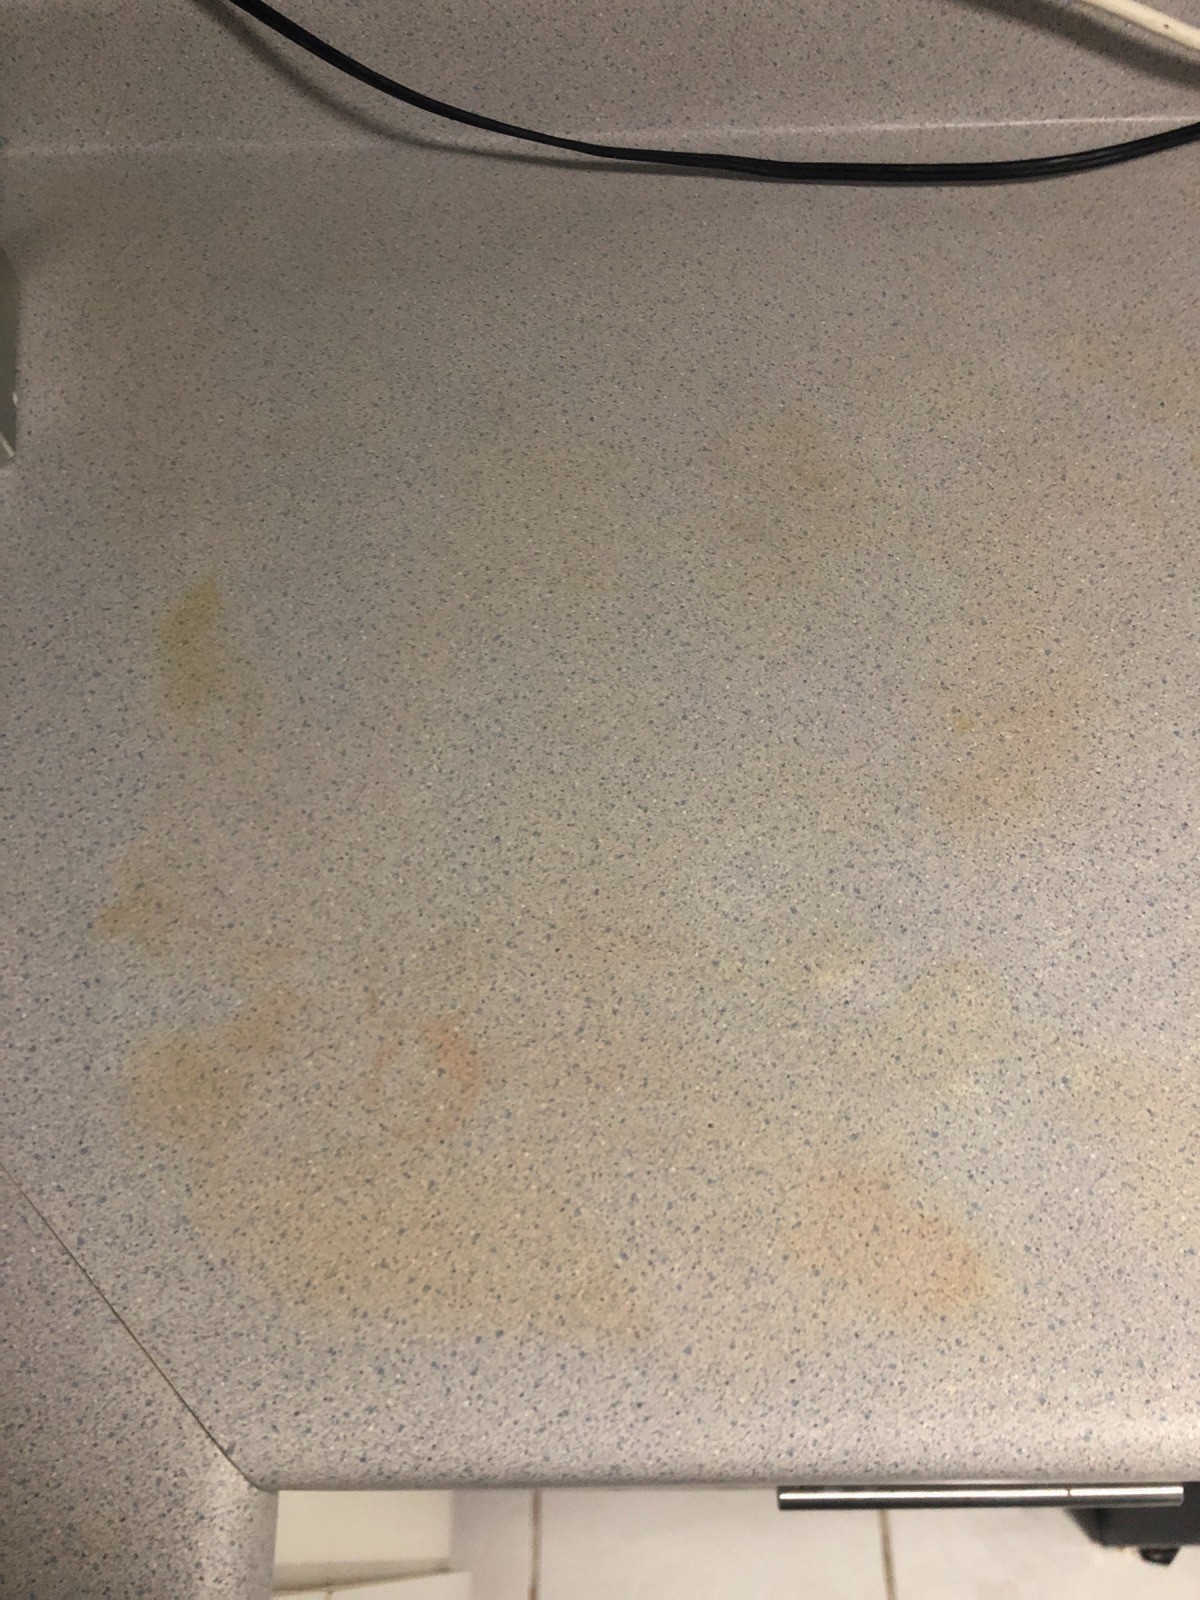 Removing Stains On Countertops Thriftyfun